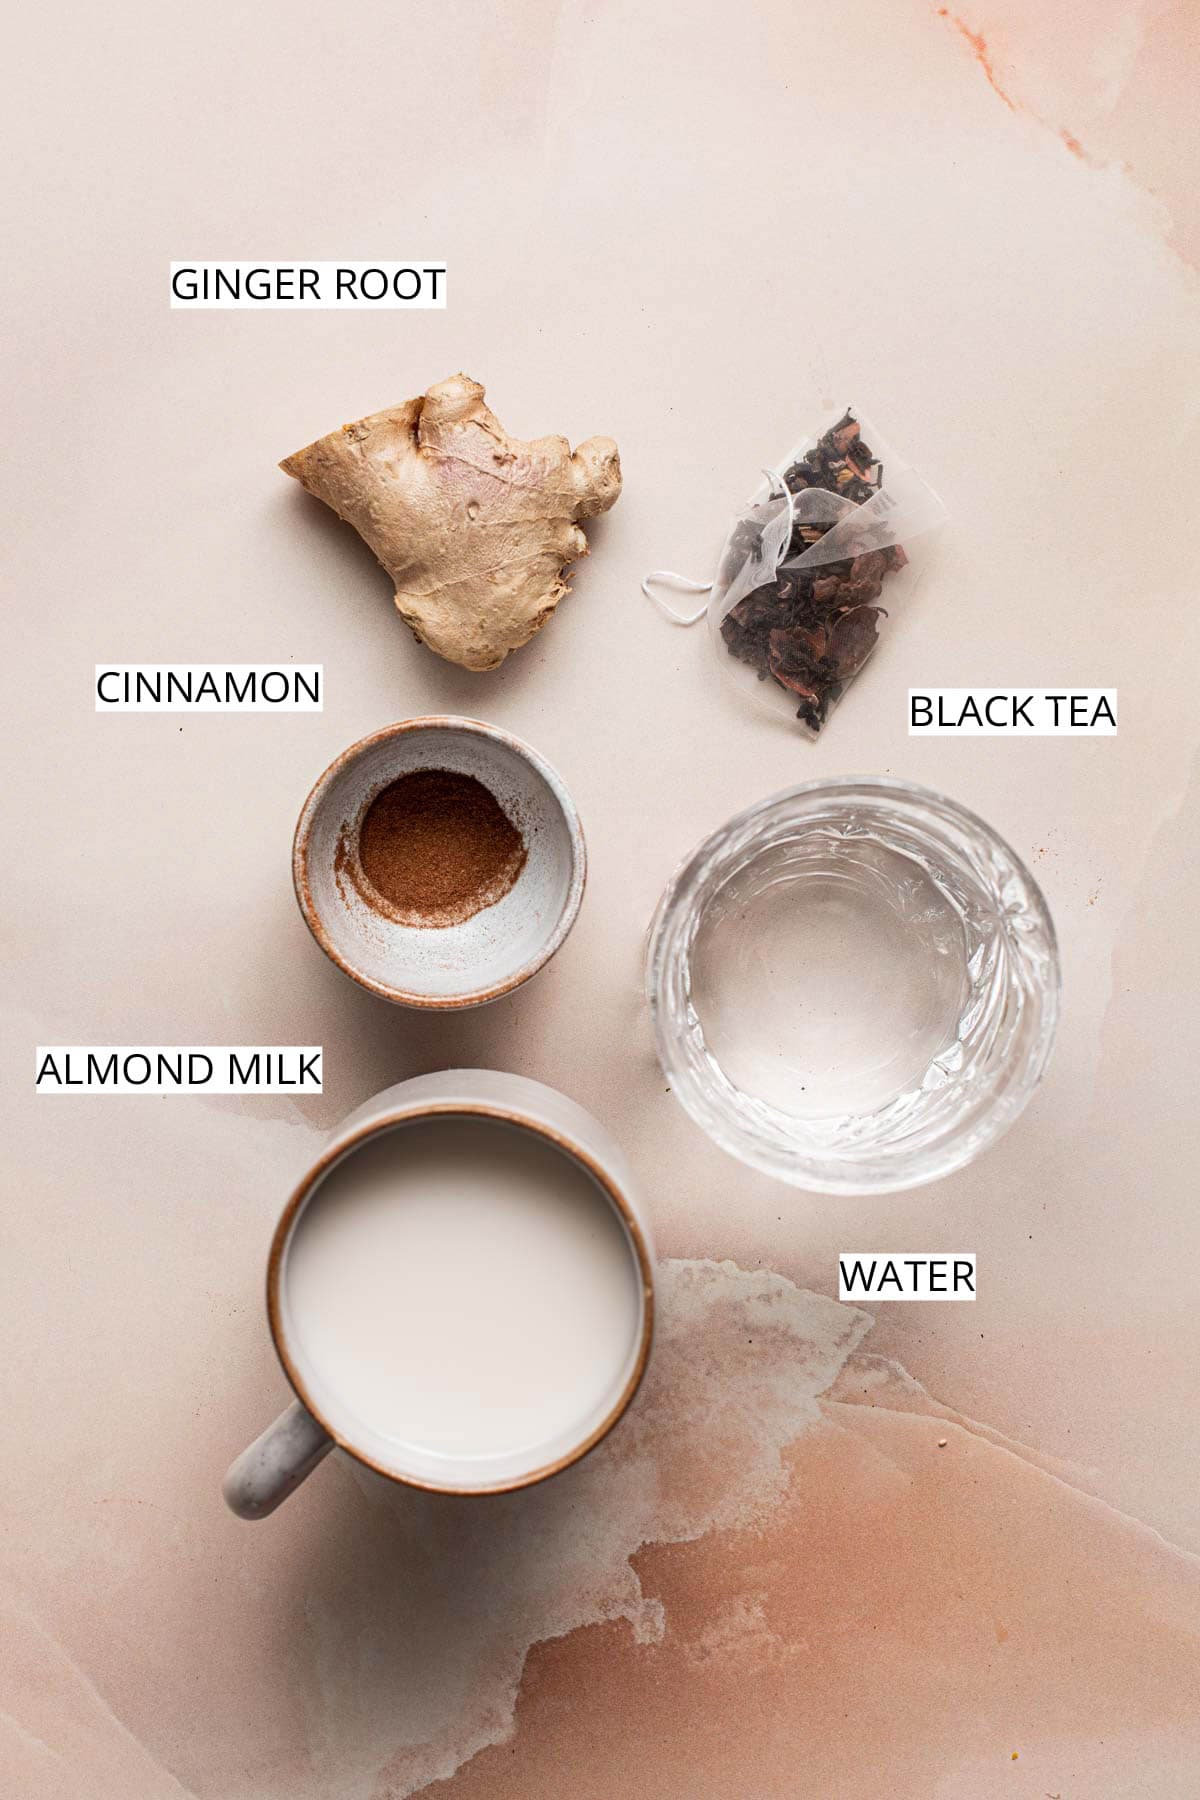 All ingredients needed to make ginger milk tea placed on a flat surface.